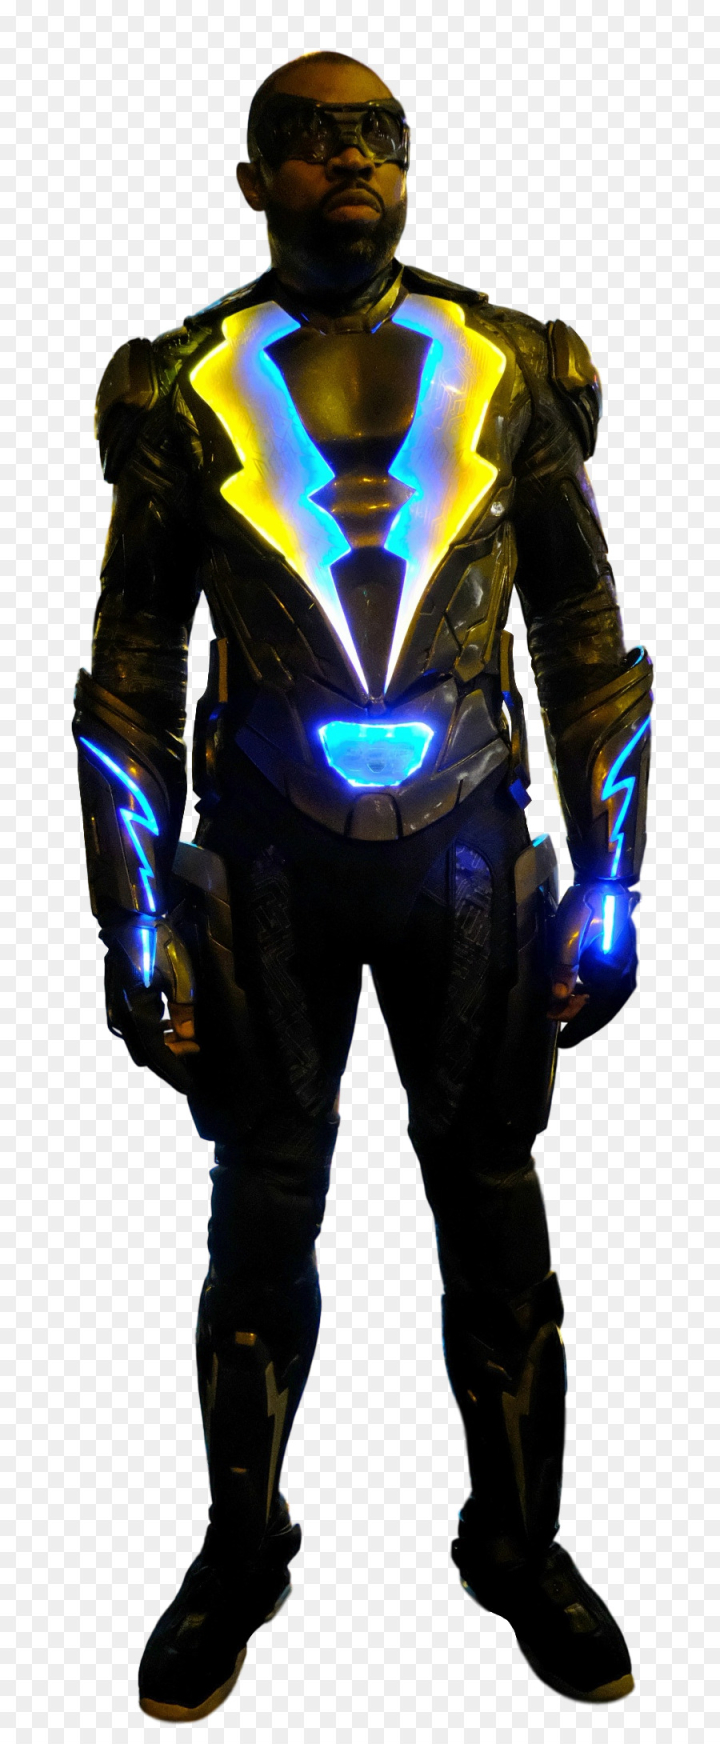 lightning,comics,dc comics,cw,arrowverse,character,superhero,comic,art,television show,black lightning,supergirl,cress williams,yellow,personal protective equipment,electric blue,fictional character,action figure,costume,sports gear,suit,png